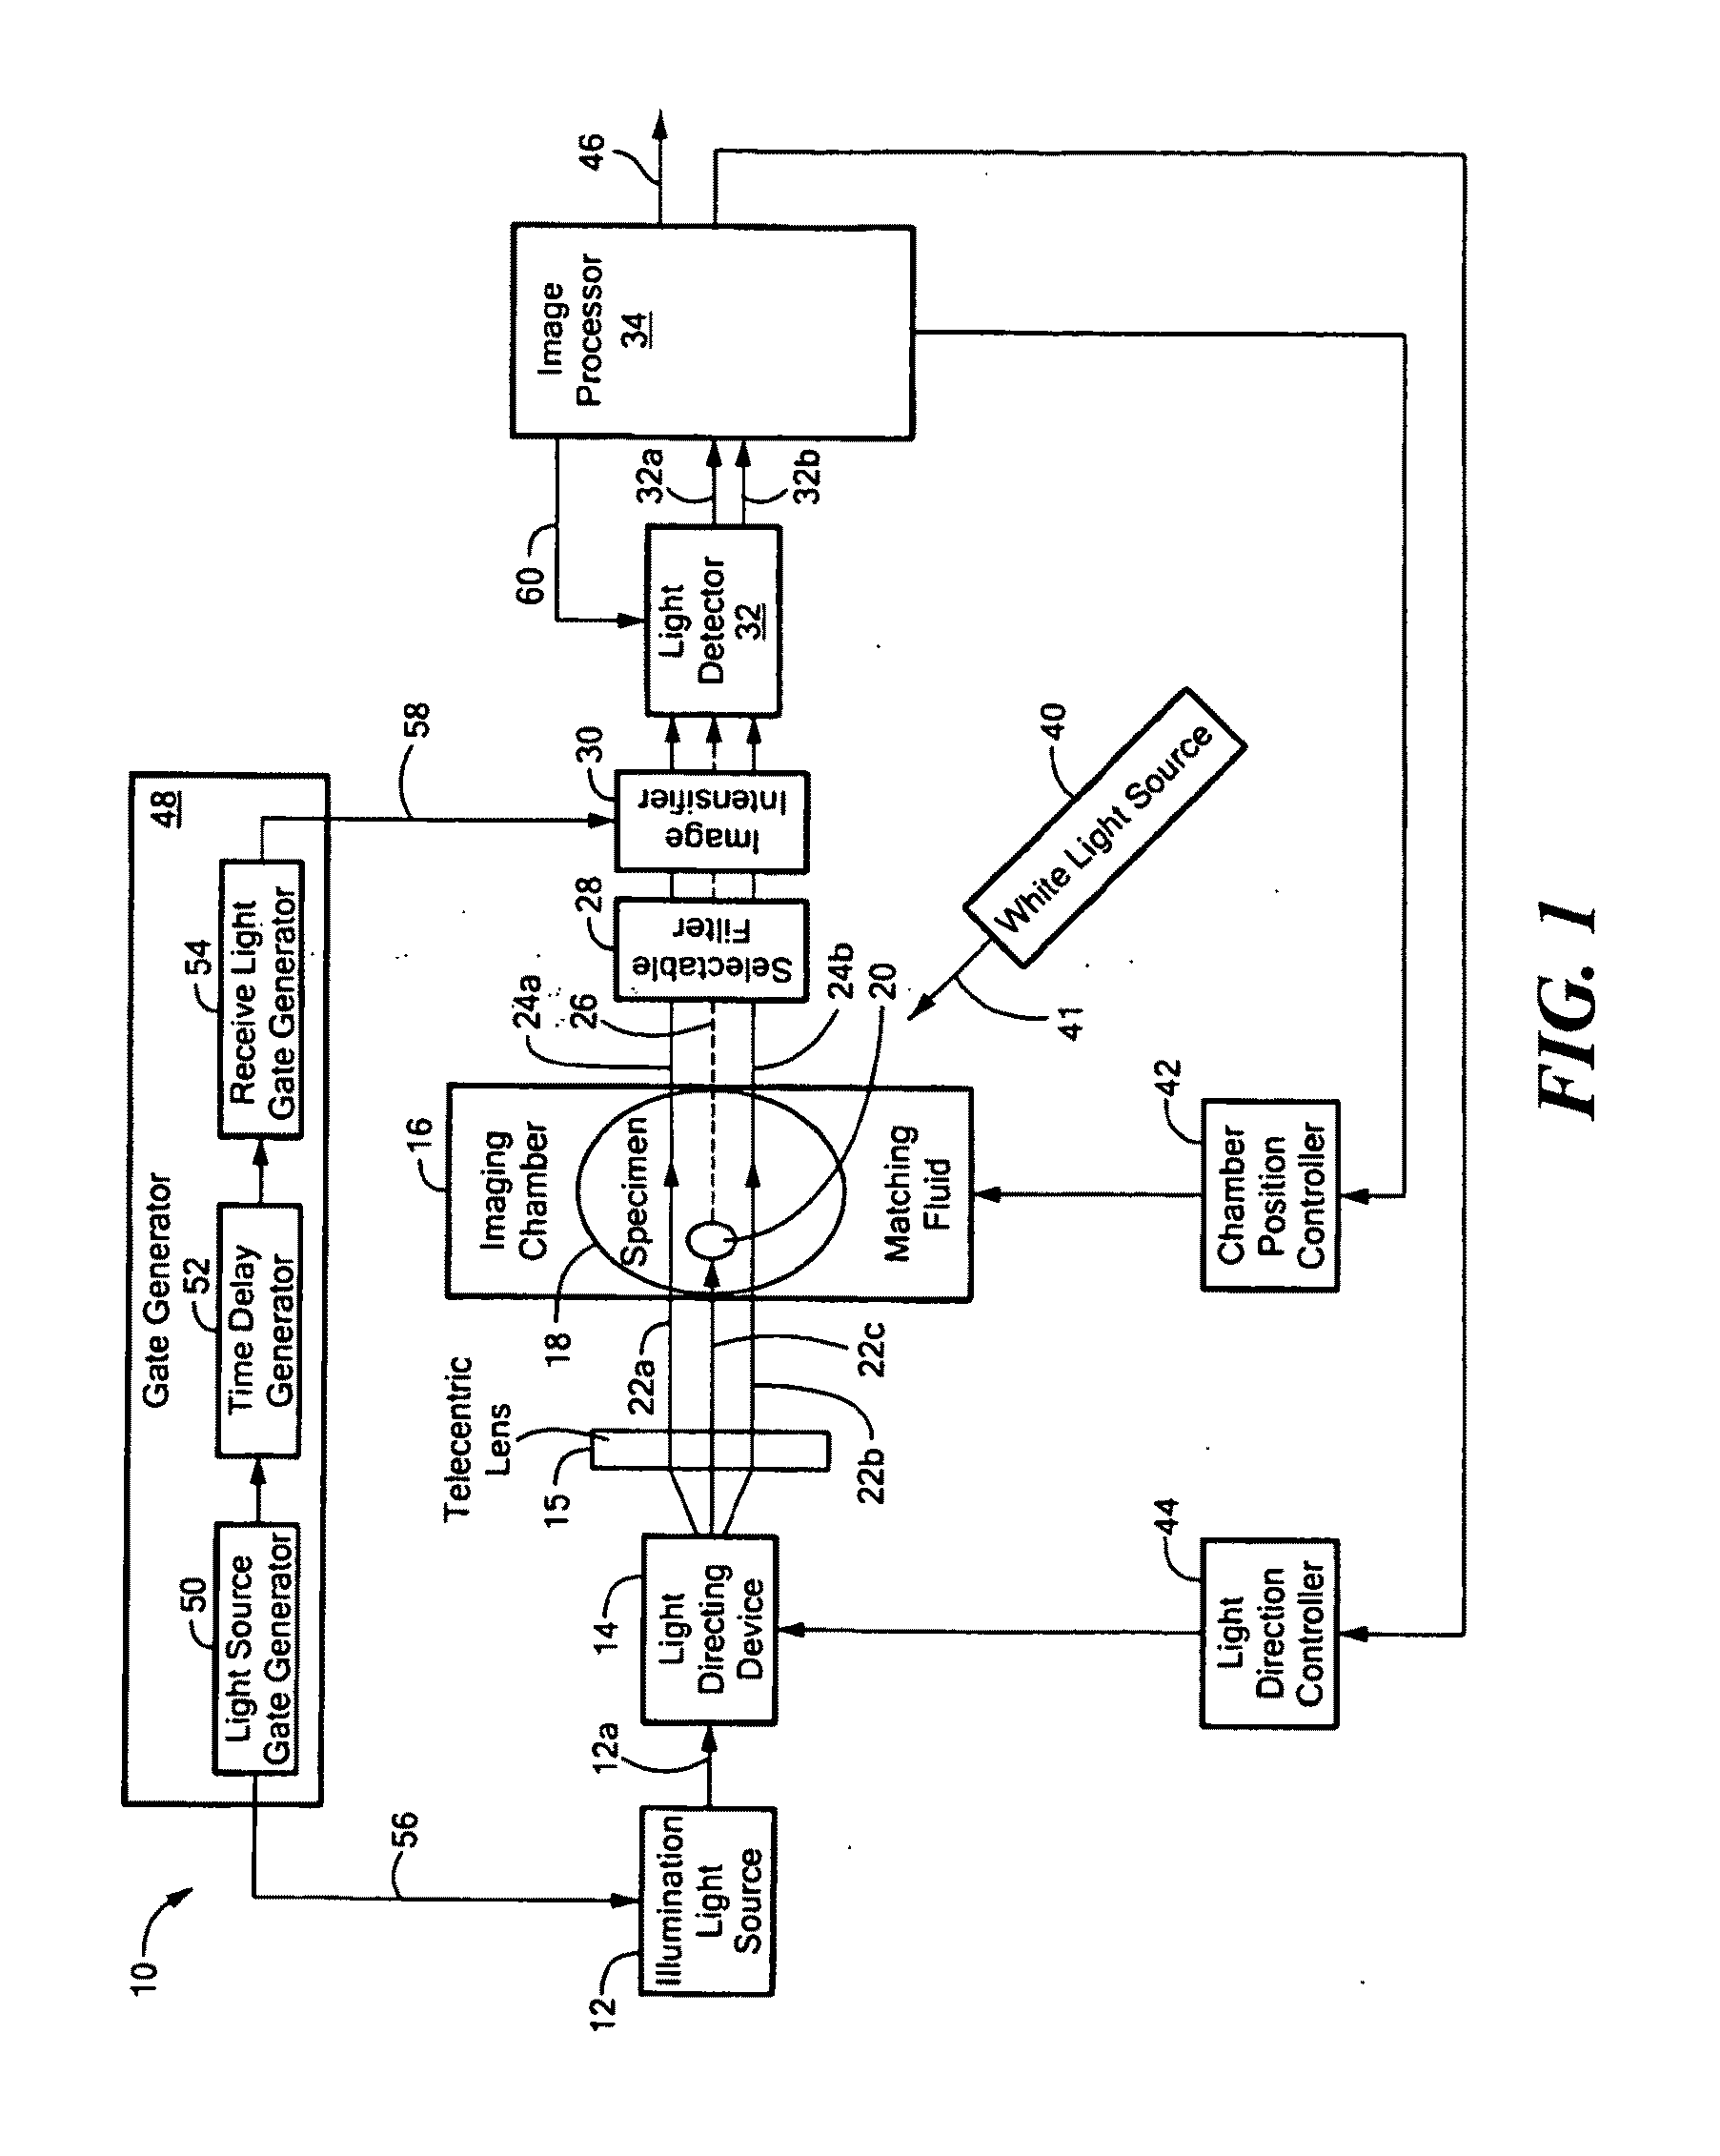 Systems and Methods for Optical Imaging Using Early Arriving Photons